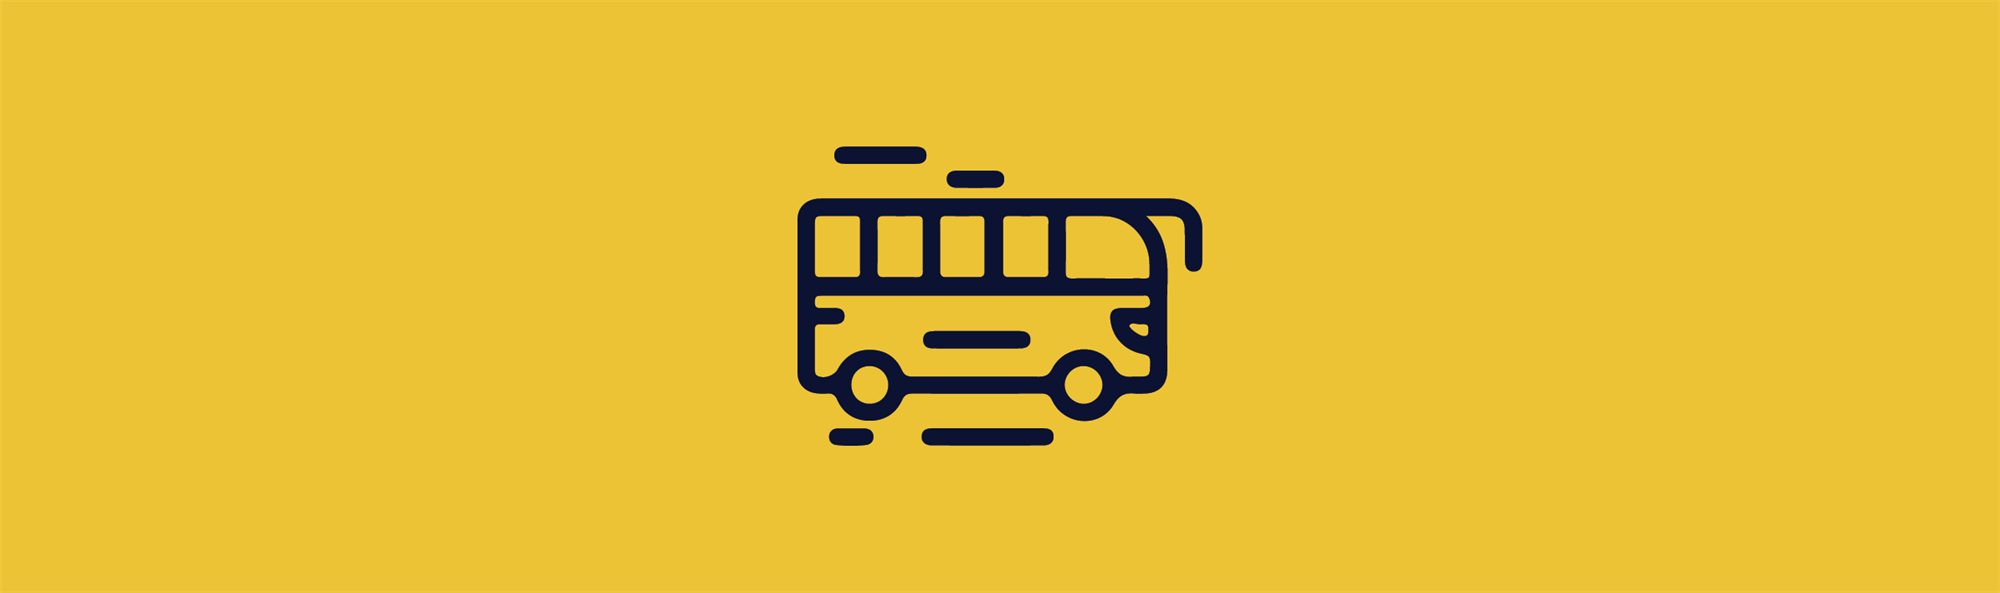 The Inter-Campus Bus Service is free. There's lots more information about other transport services too including the safety bus. This should help you get to and from Uni and between campuses with ease and on time